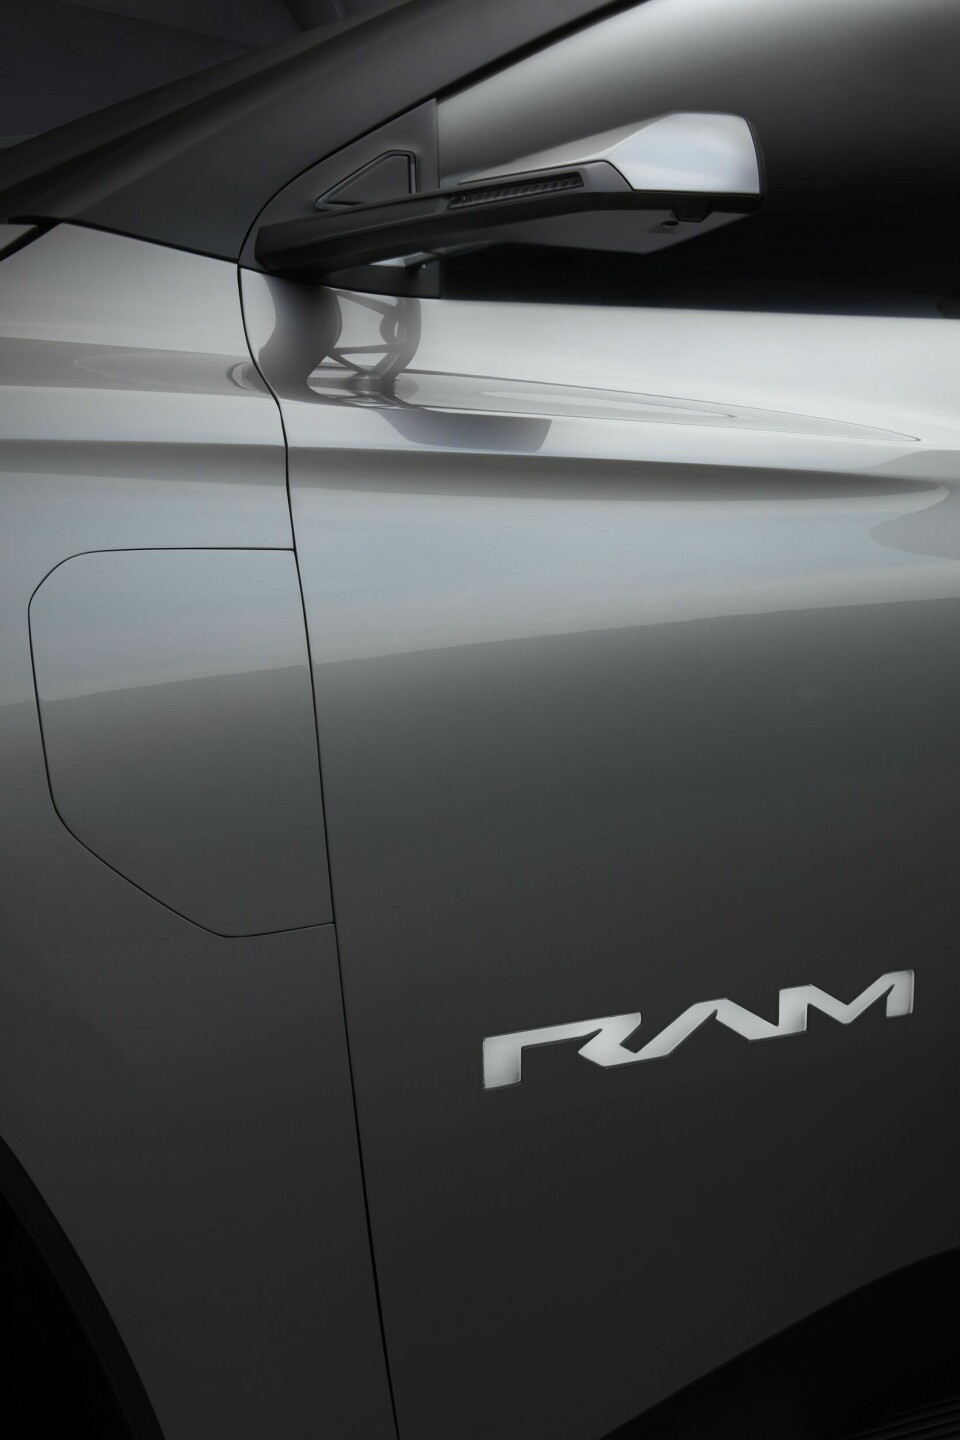 Ram 1500 Revolution Battery-electric Vehicle (BEV) Concept charge port, side view mirror and badging